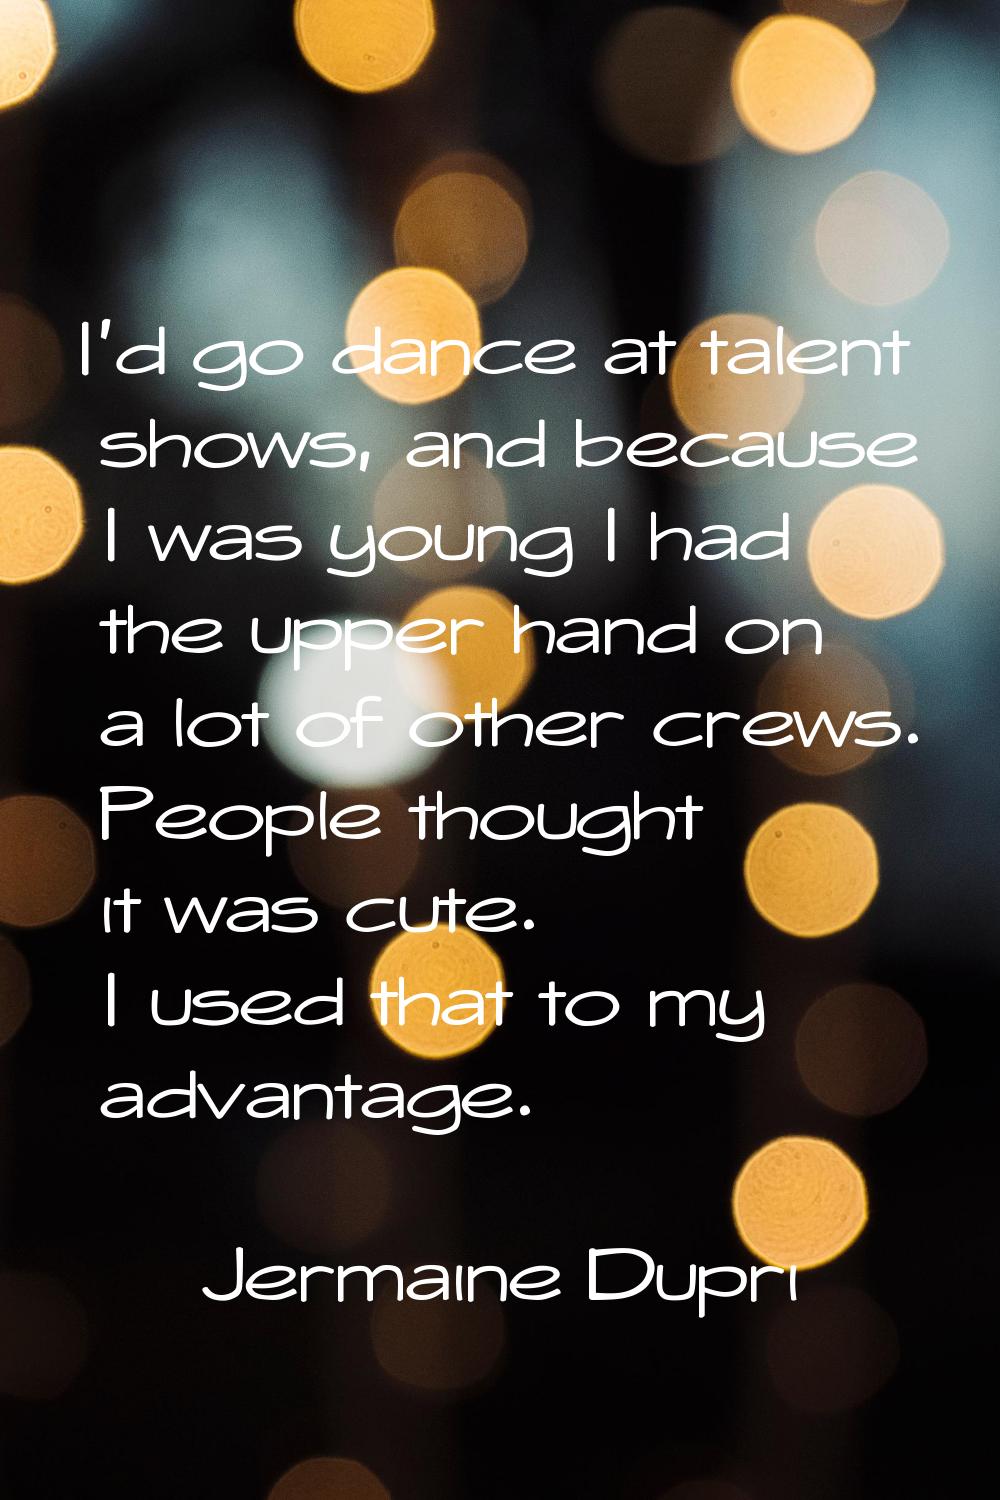 I'd go dance at talent shows, and because I was young I had the upper hand on a lot of other crews.